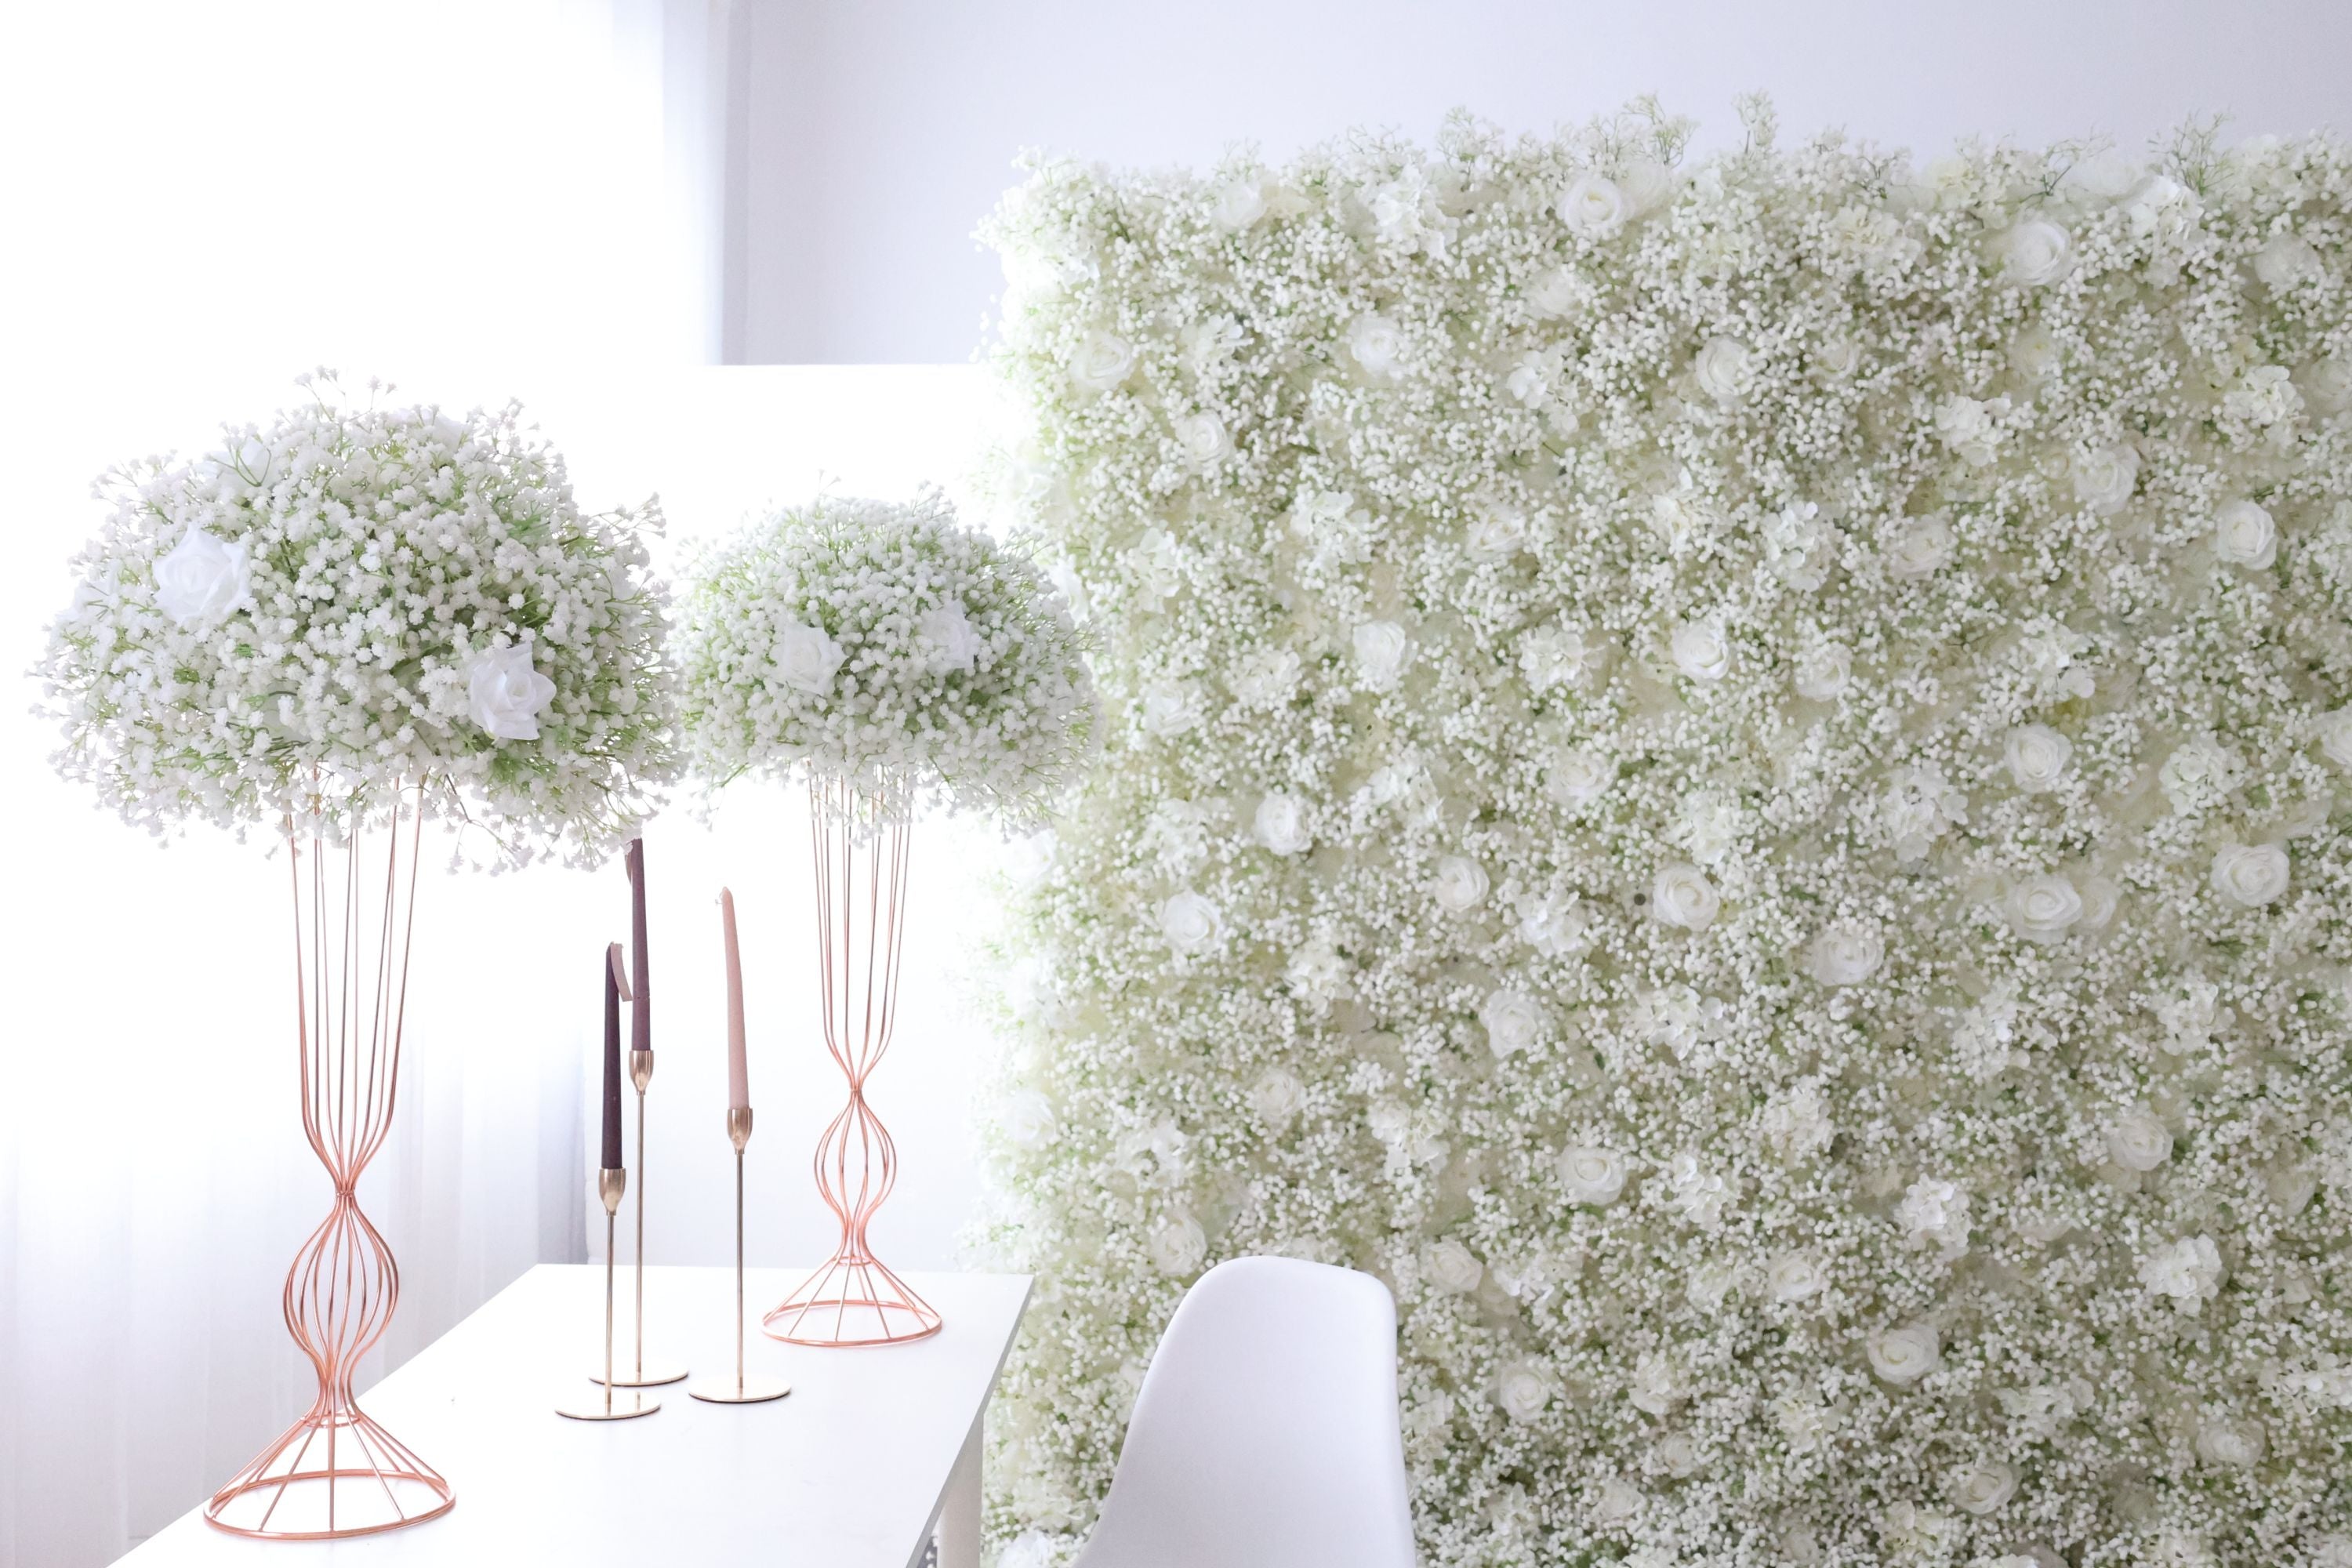 Solitary Elegance - A Delicate White Rose Amidst a Sea of Baby's Breath FB-030